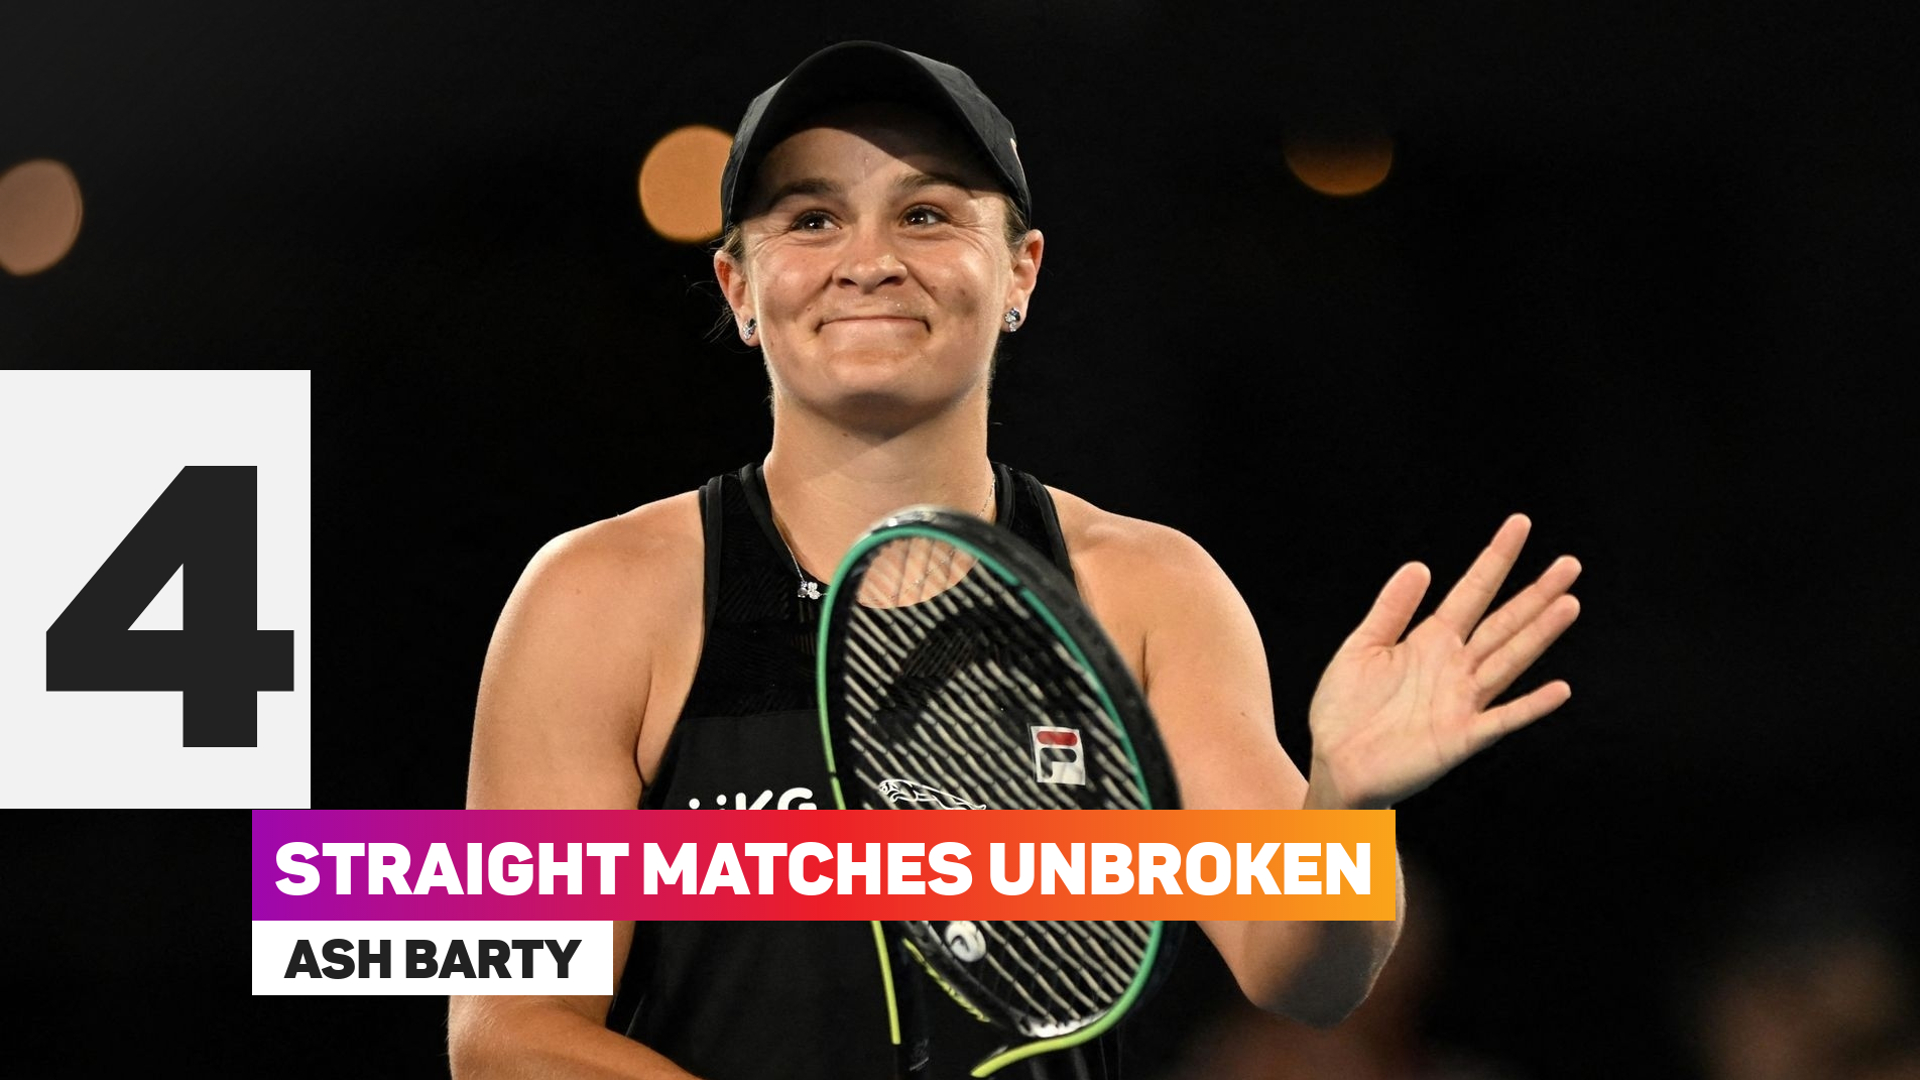 Ash Barty is in great form